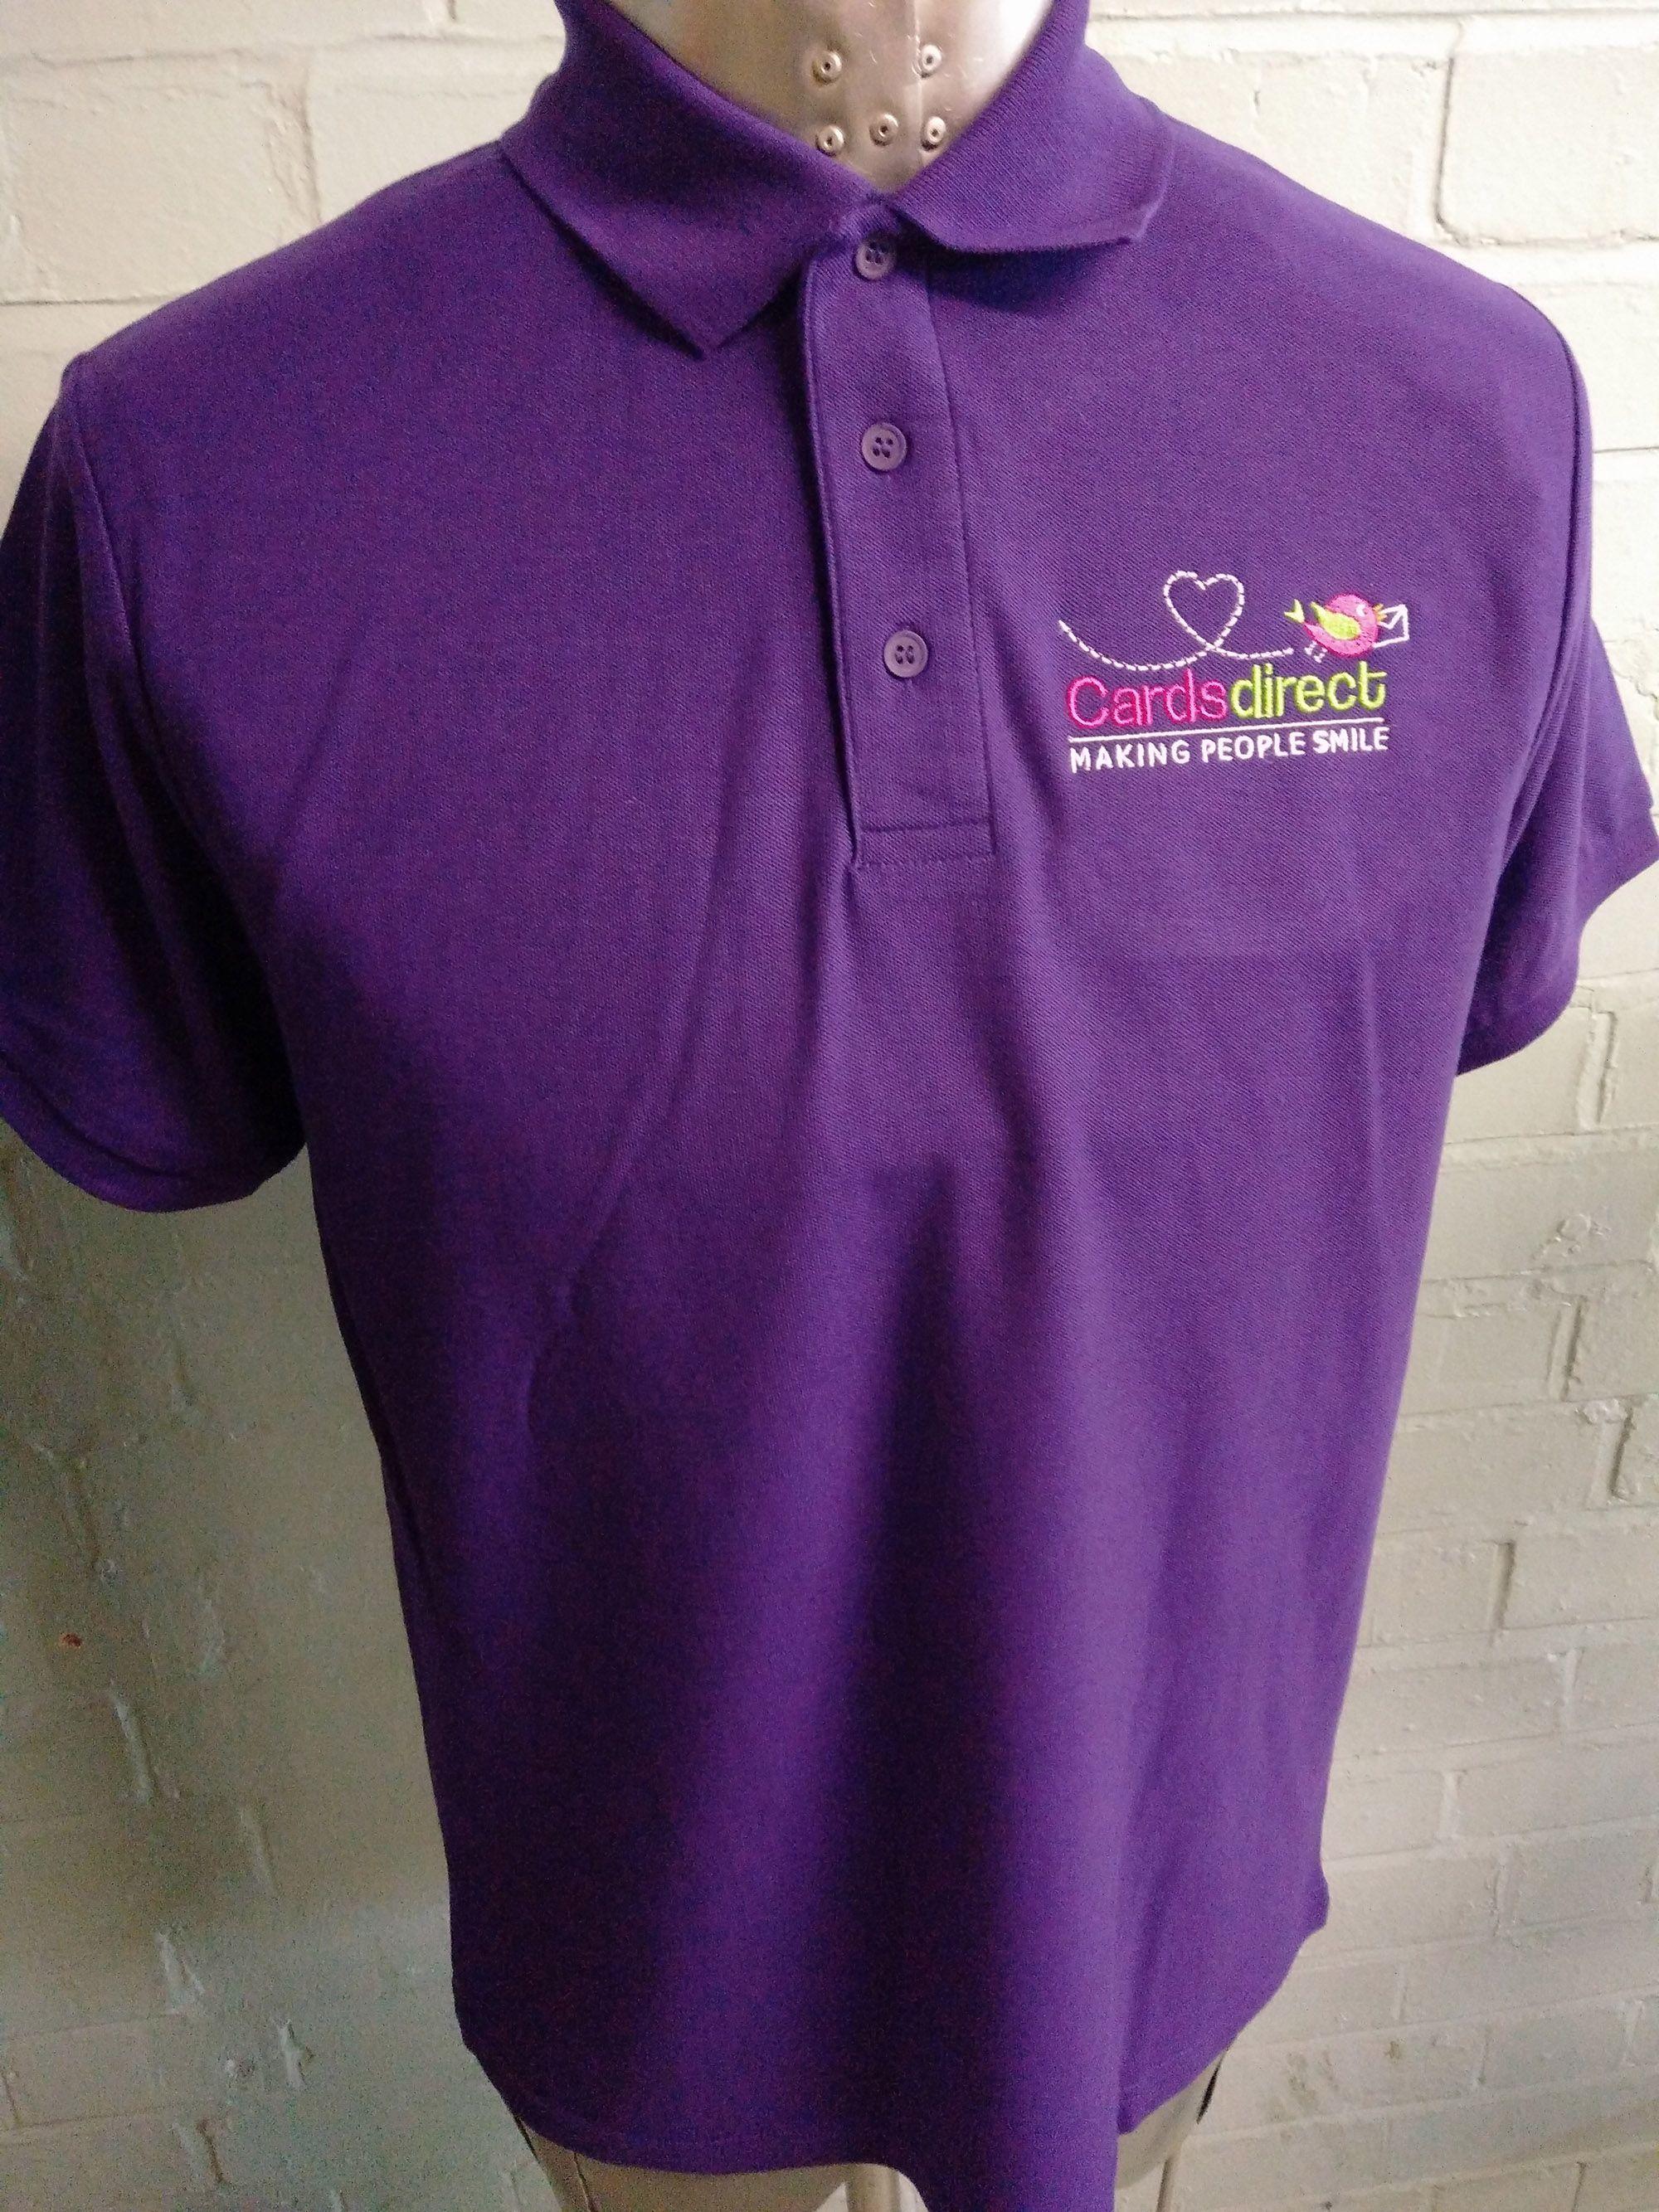 Lavender Polo Logo - Bright Purple Polo T Shirts For Cards Direct With Custom Embroidered